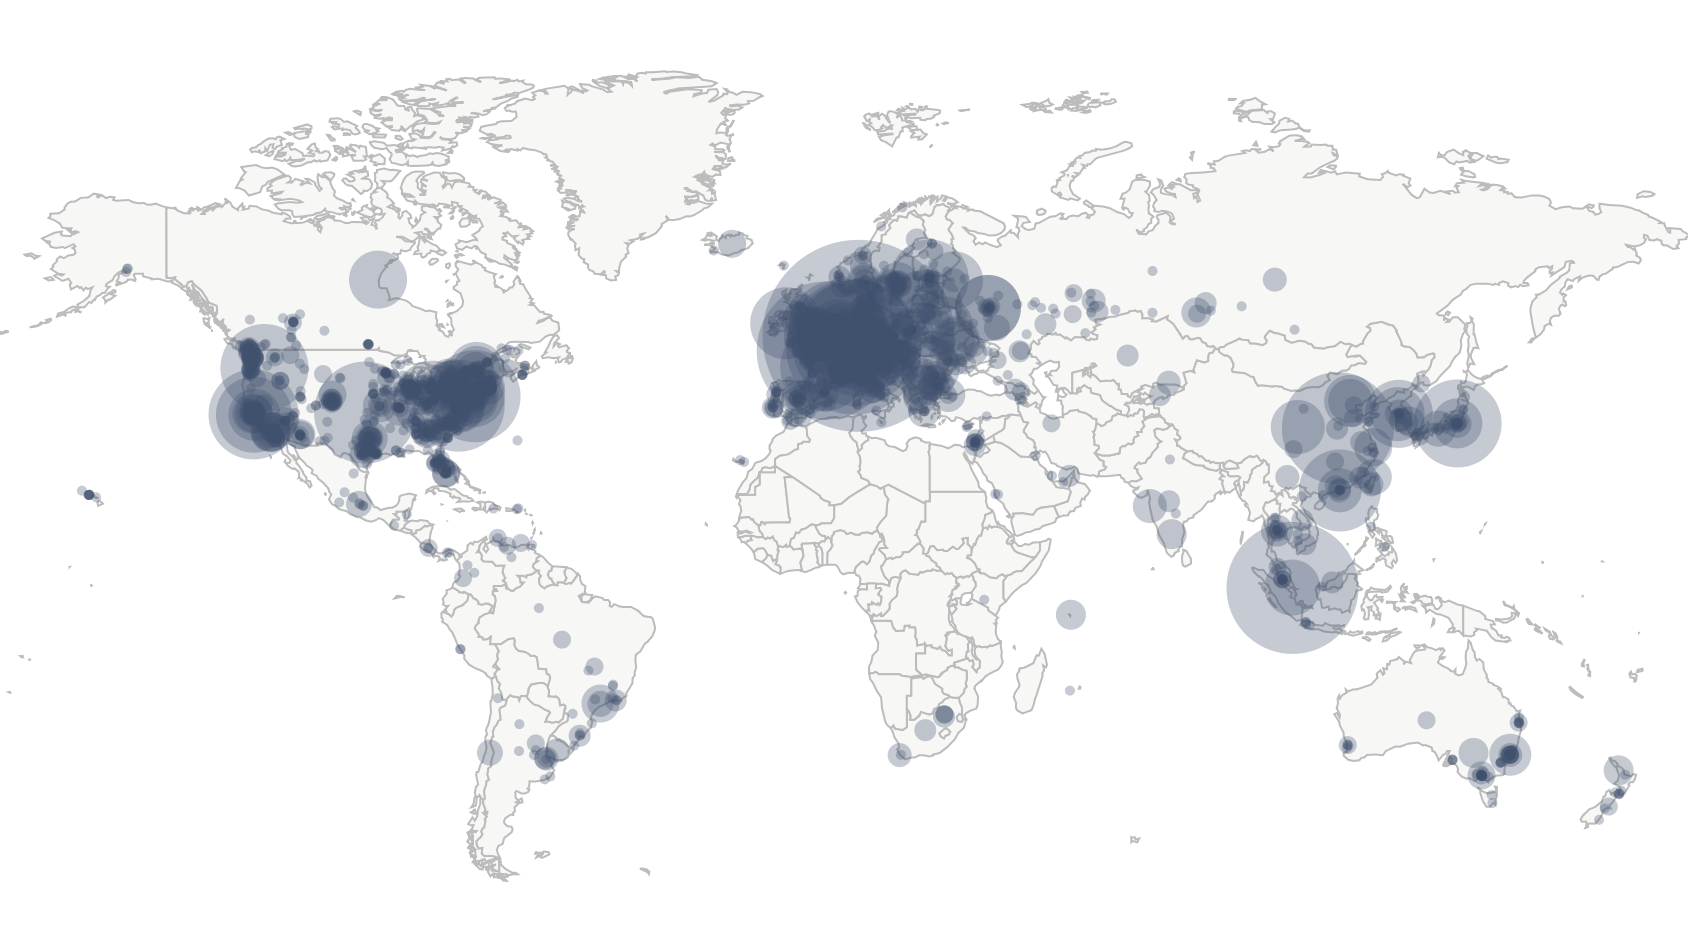 This map shows the global distribution of bitcoin nodes. Most of the nodes are located in North American, Europe, and Asia, but there is also good distribution of nodes in other locations.